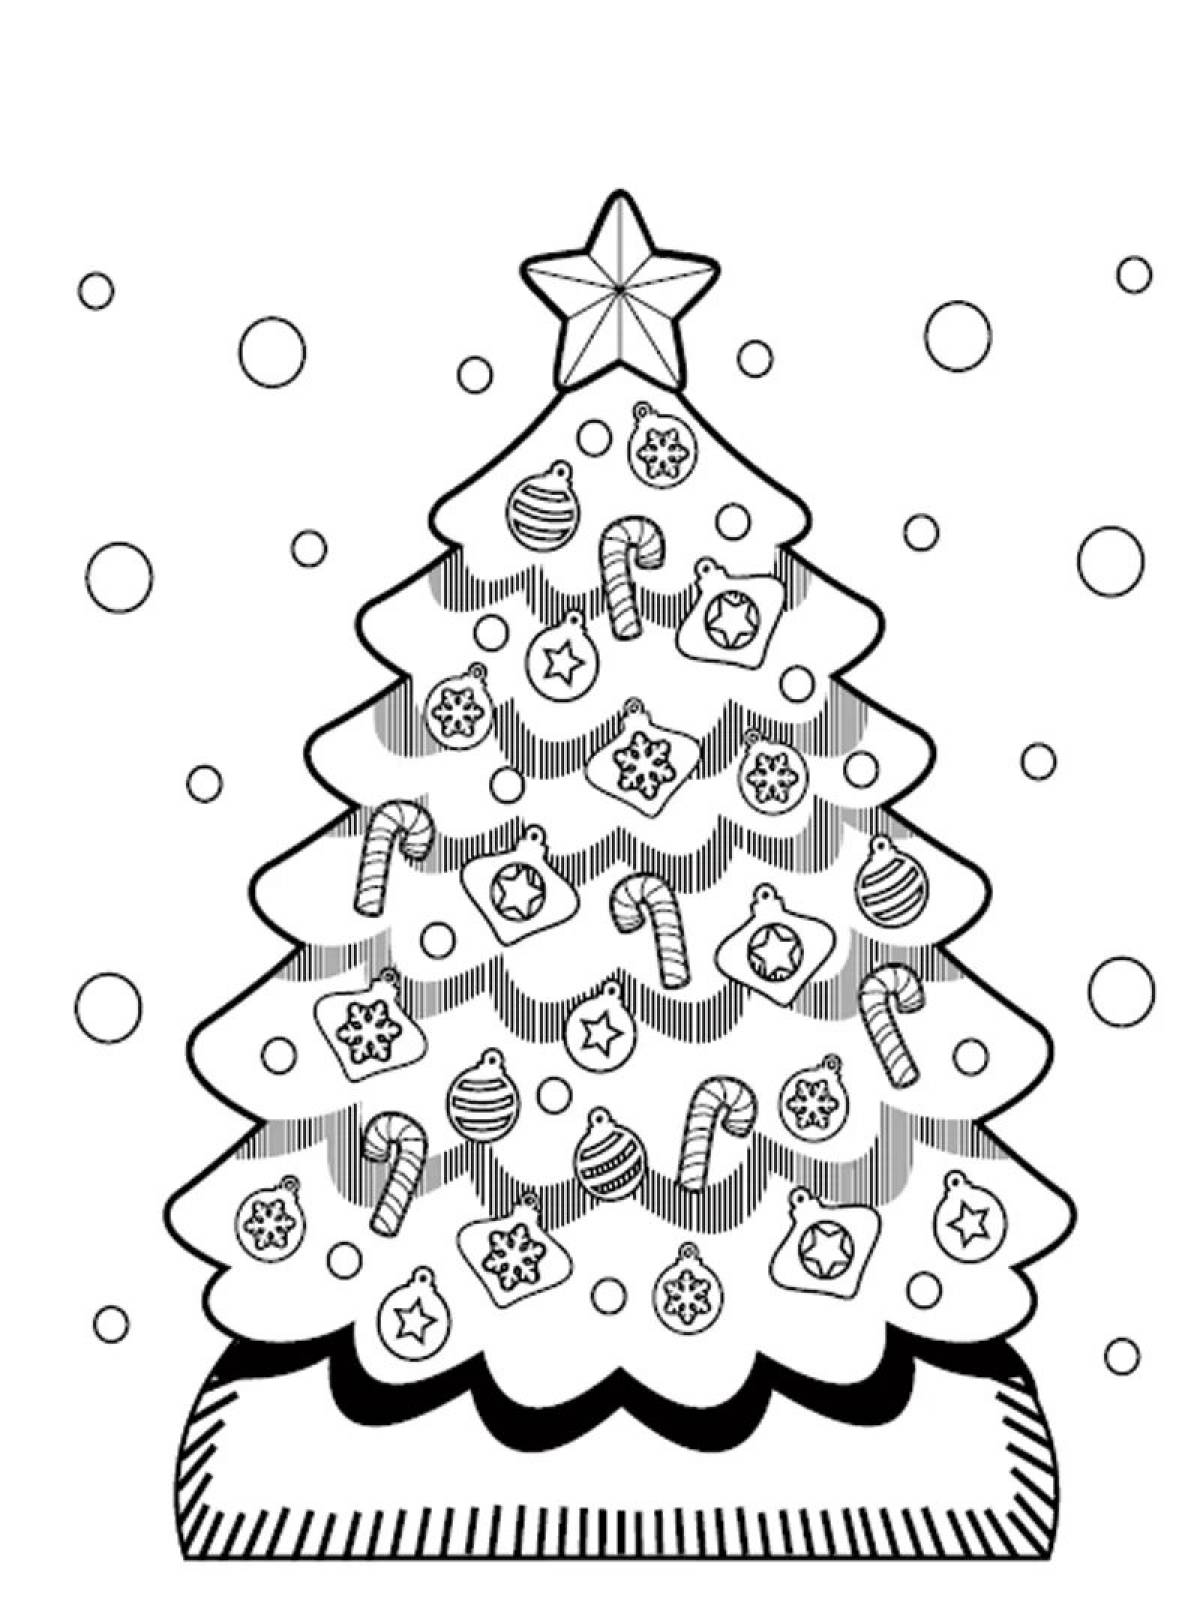 Coloring book shimmering forest grew a Christmas tree